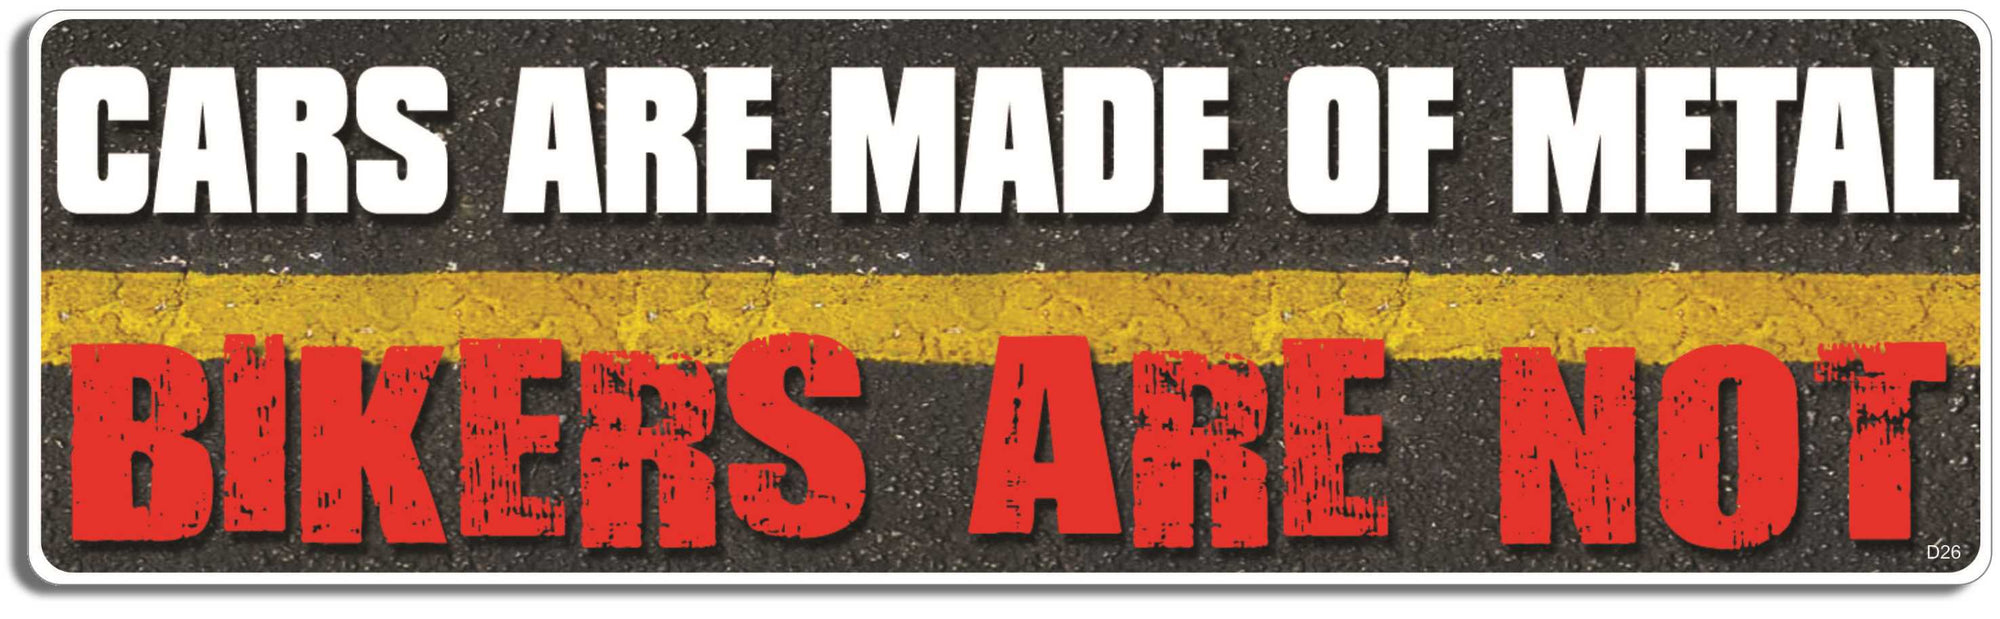 Cars are made of metal - Bikers are not - 3" x 10" Bumper Sticker--Car Magnet- -  Decal Bumper Sticker-funny Bumper Sticker Car Magnet Cars are made of metal-Bikers are-  Decal for carscyclists, motorbikes, road safety, watch out for cyclists, watch out for motorcycles